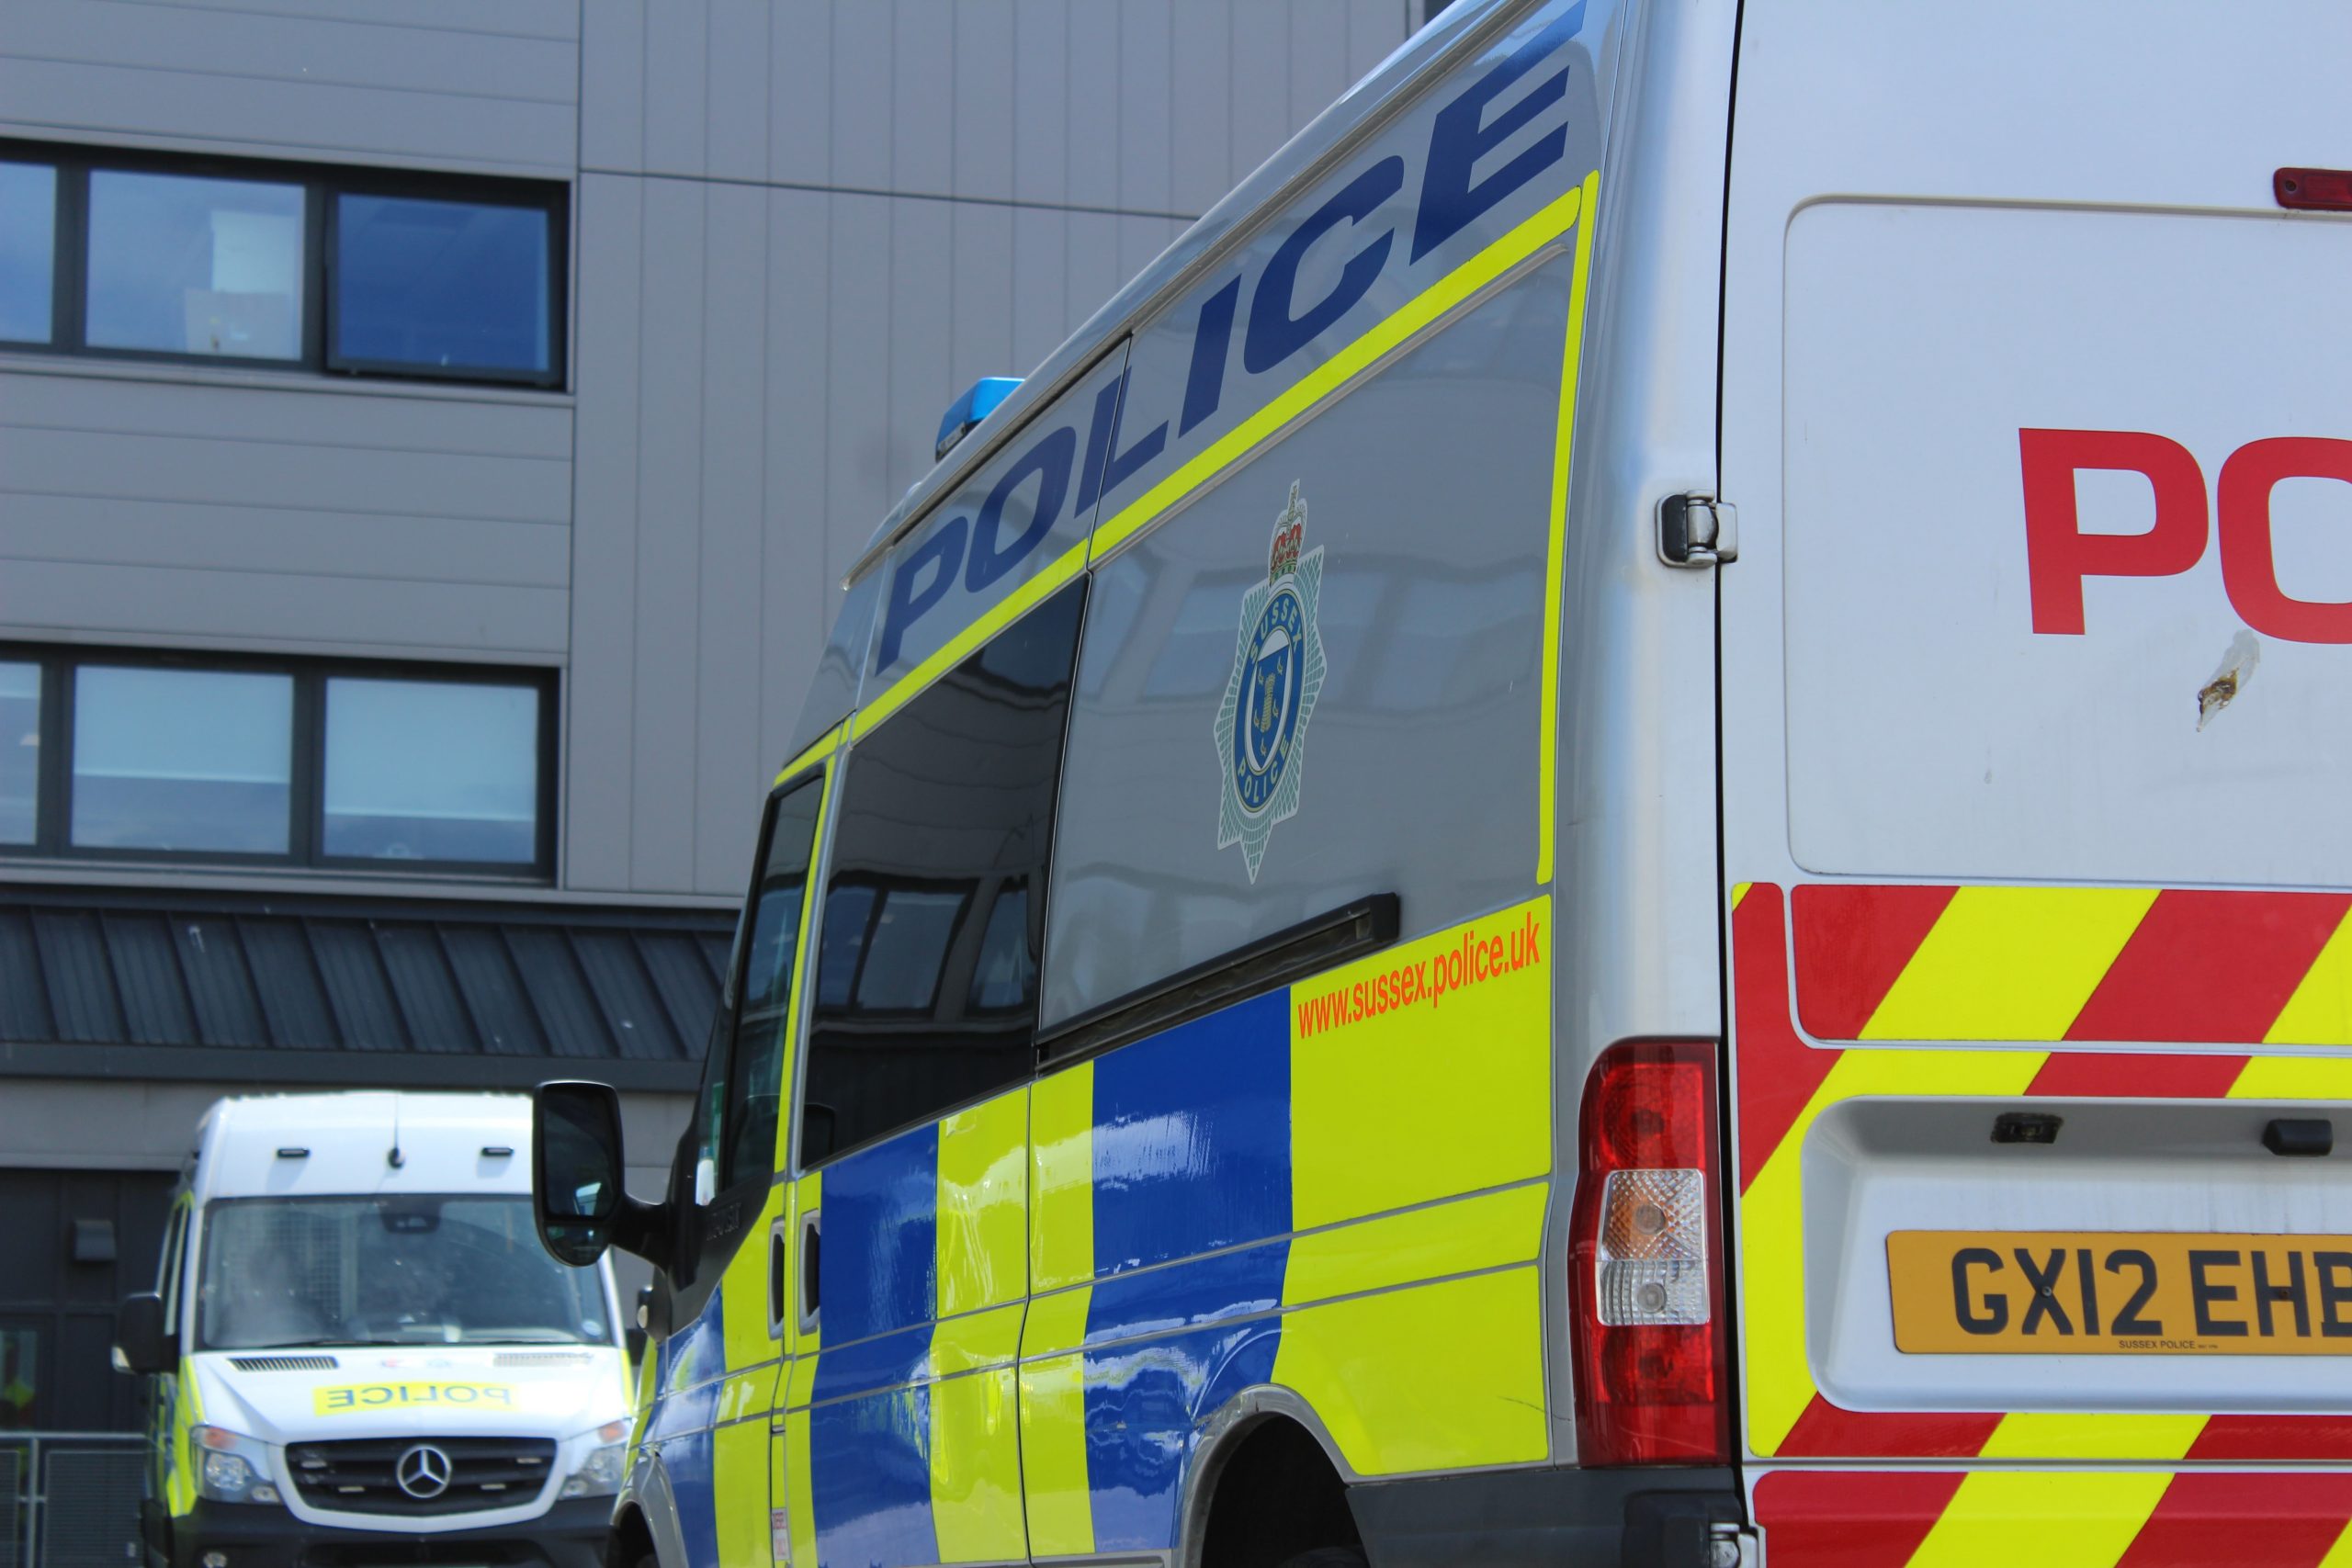 The photo shows a side shot of a police van 